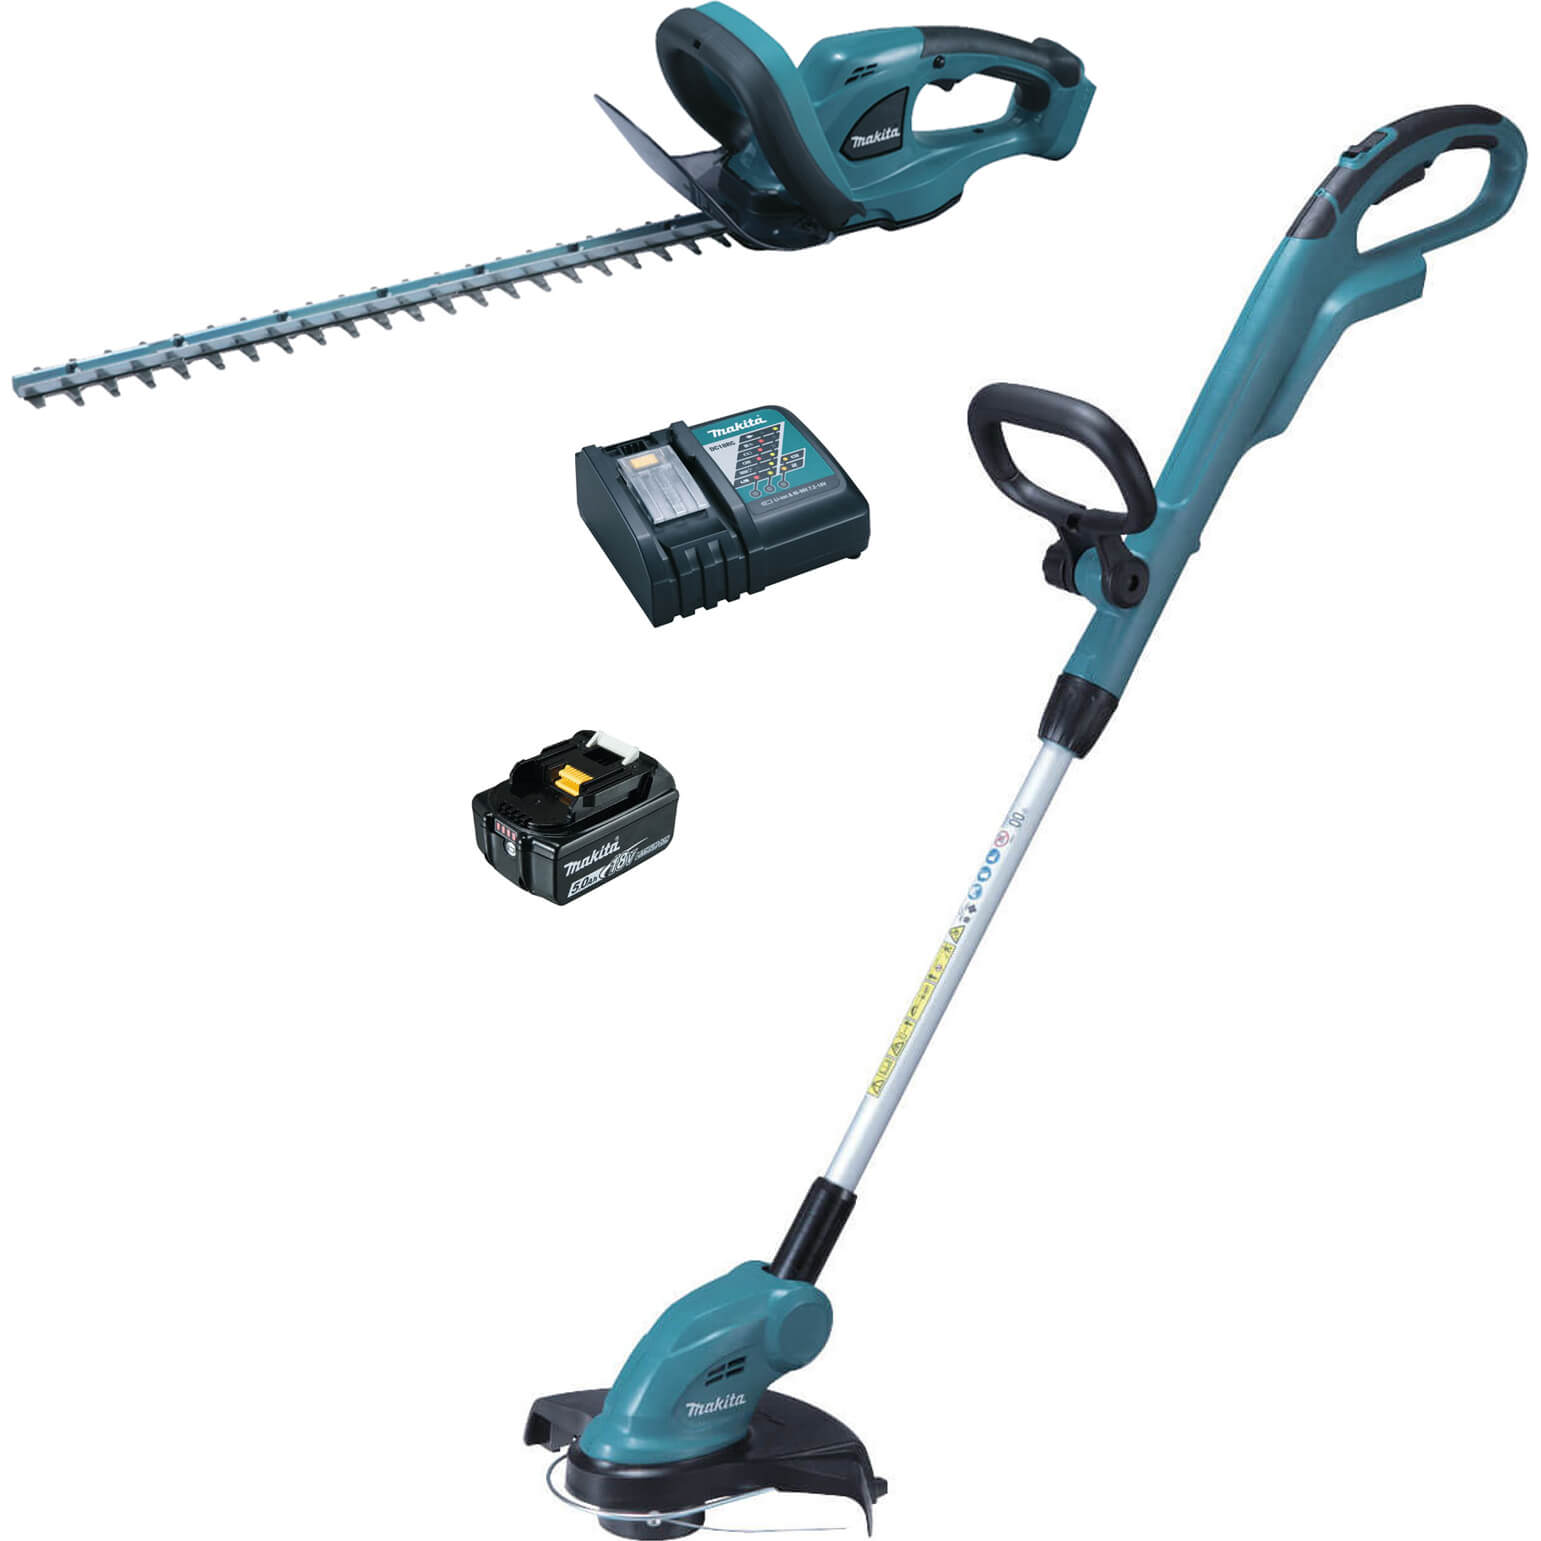 Makita 18v LXT Cordless Grass and Hedge Trimmer Kit 1 x 5ah Li-ion Charger